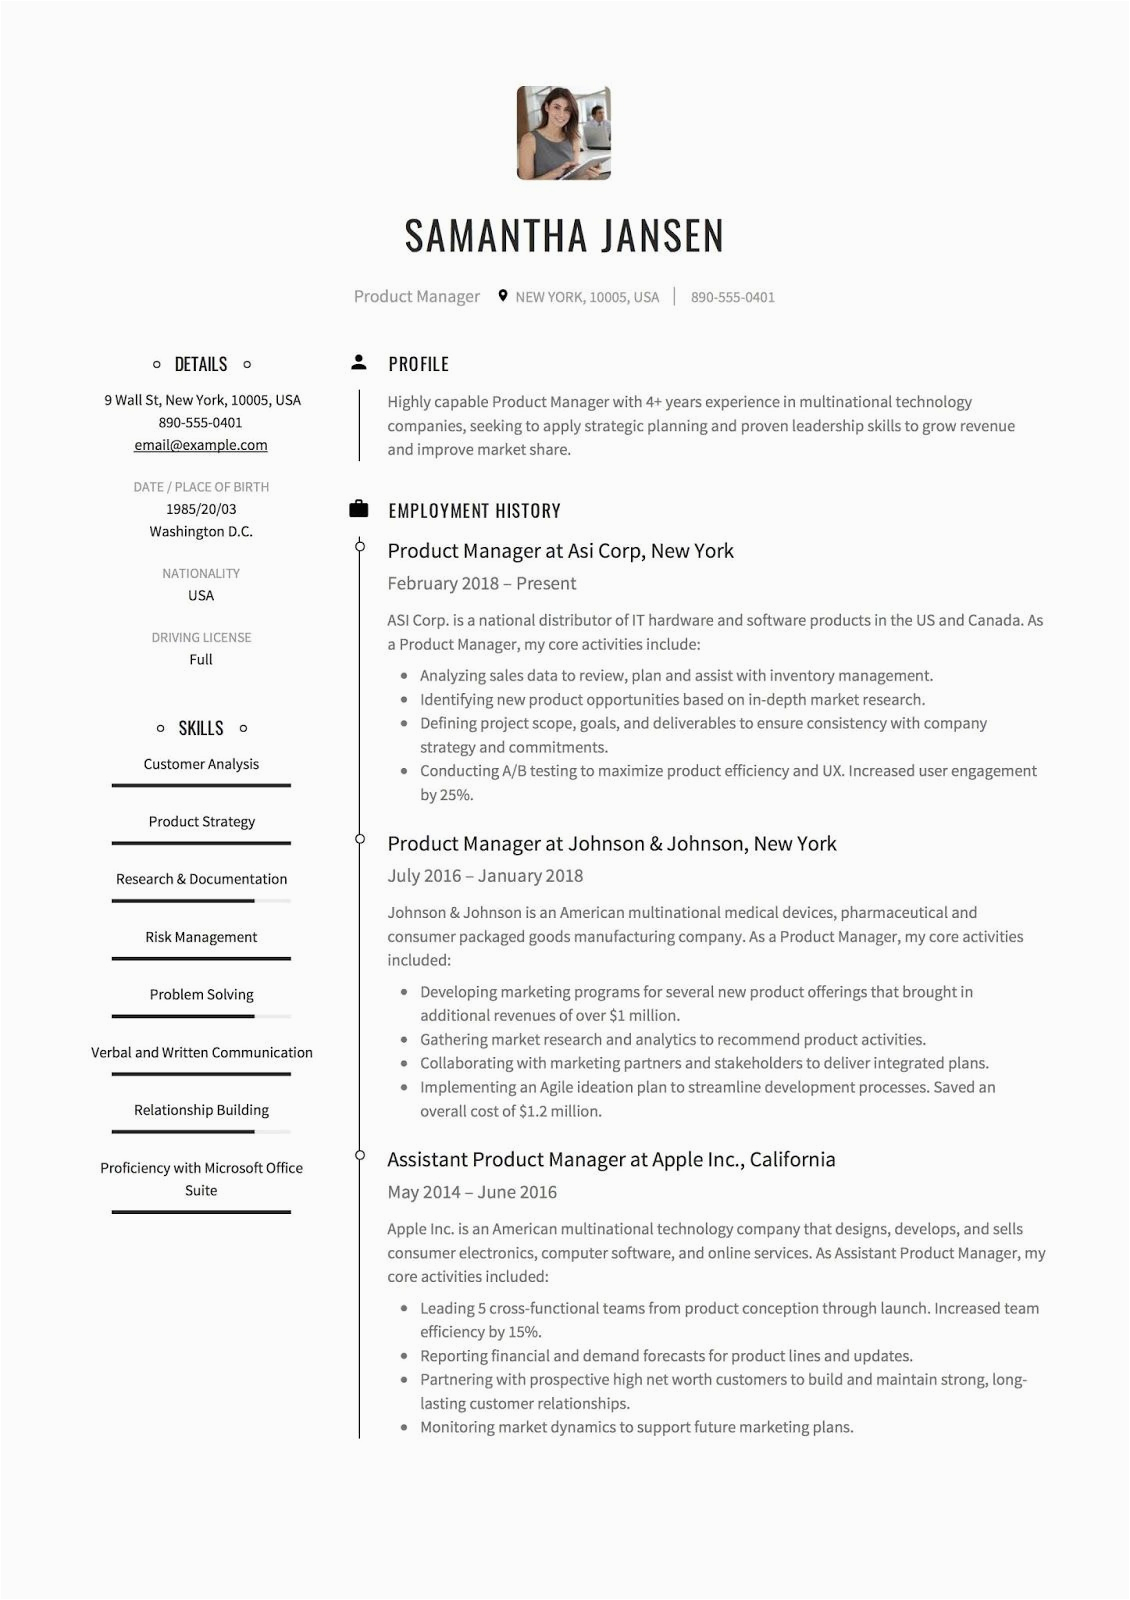 Sample Resume for Production Manager In India Product Manager Resume Sample Product Manager Resume